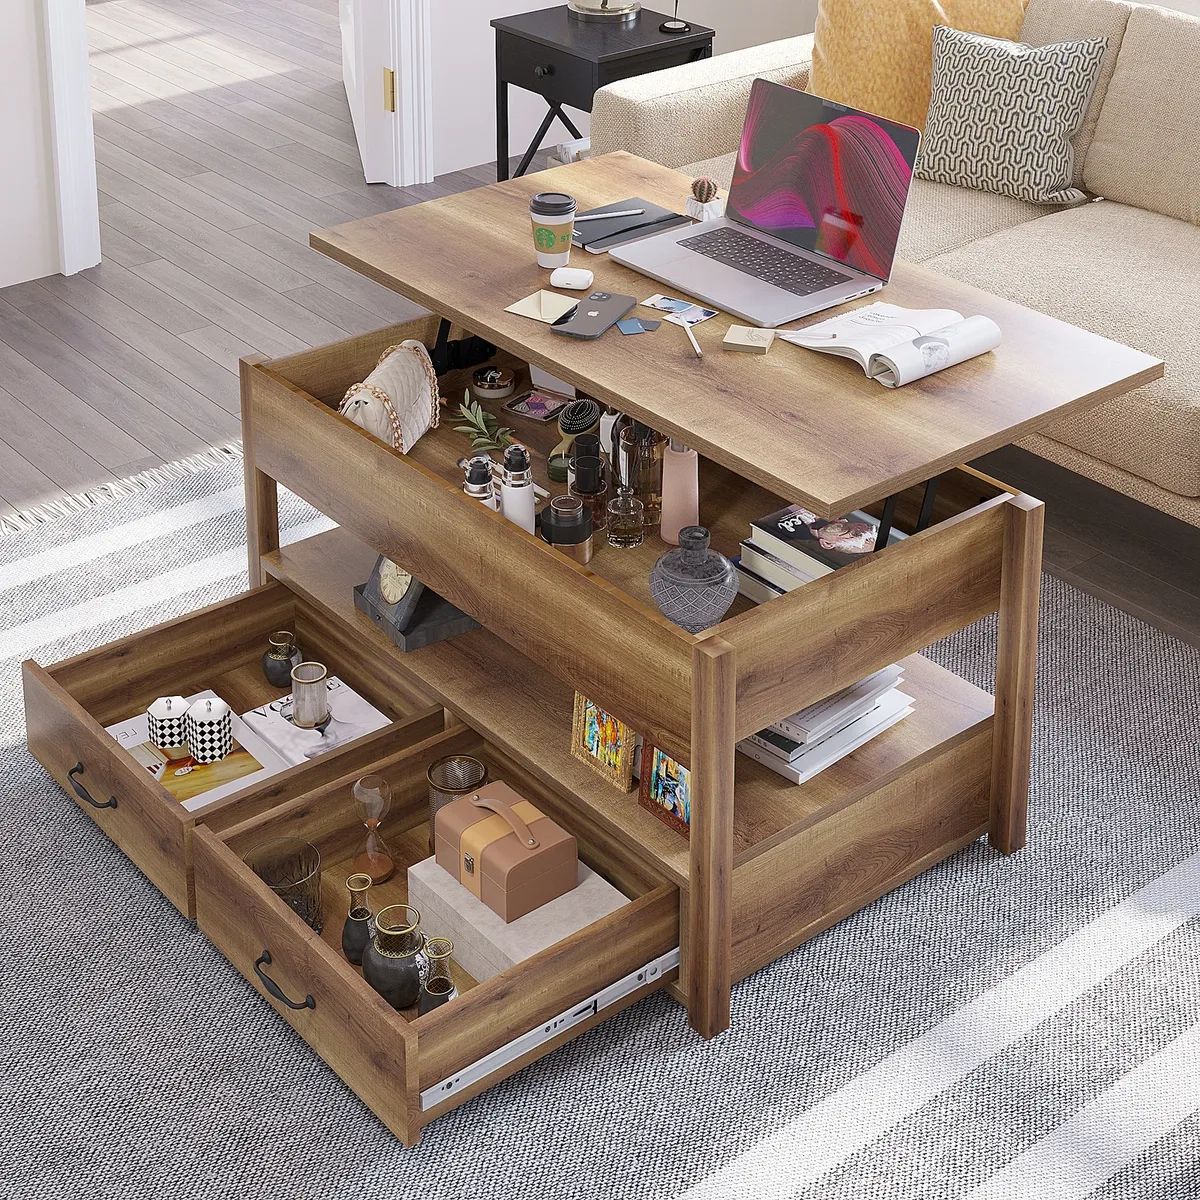 2 Drawer Lift Top Coffee Table Wooden With Hidden Compartment & Storage  Shelves | Ebay In Lift Top Coffee Tables With Hidden Storage Compartments (Photo 1 of 15)